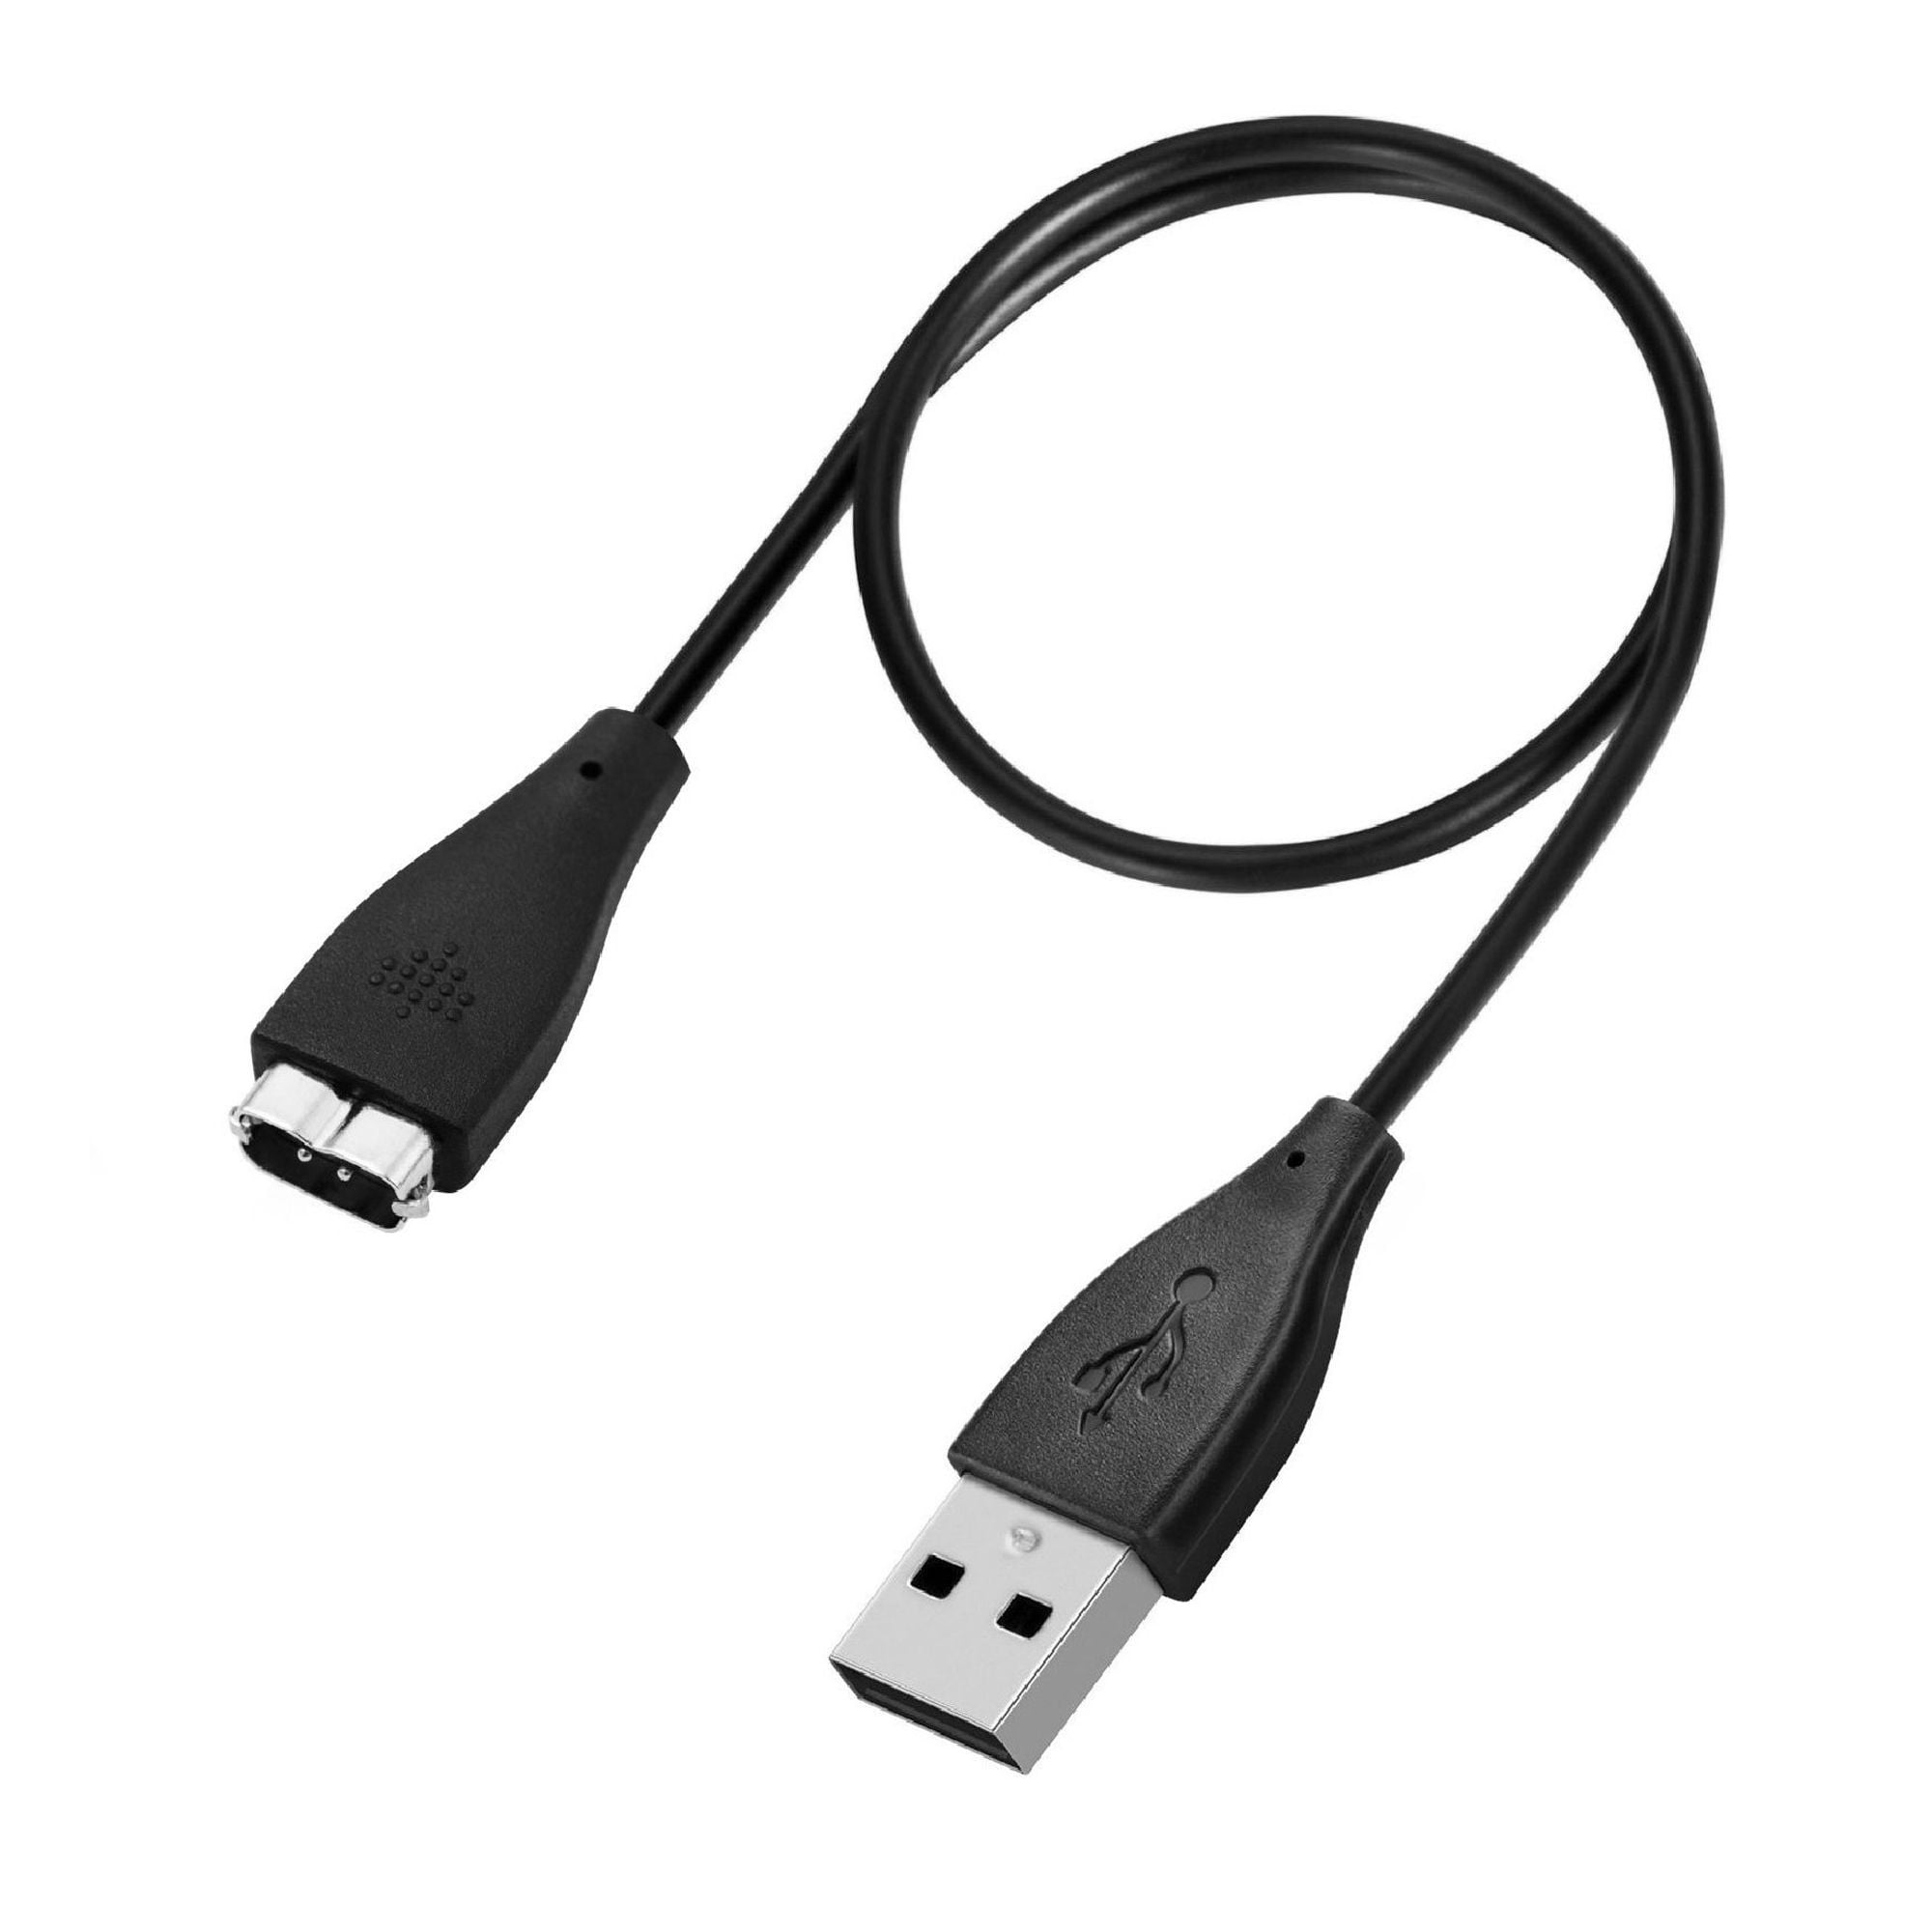 Fitbit One USB  Charging Cable and USB SYNC Dongle 